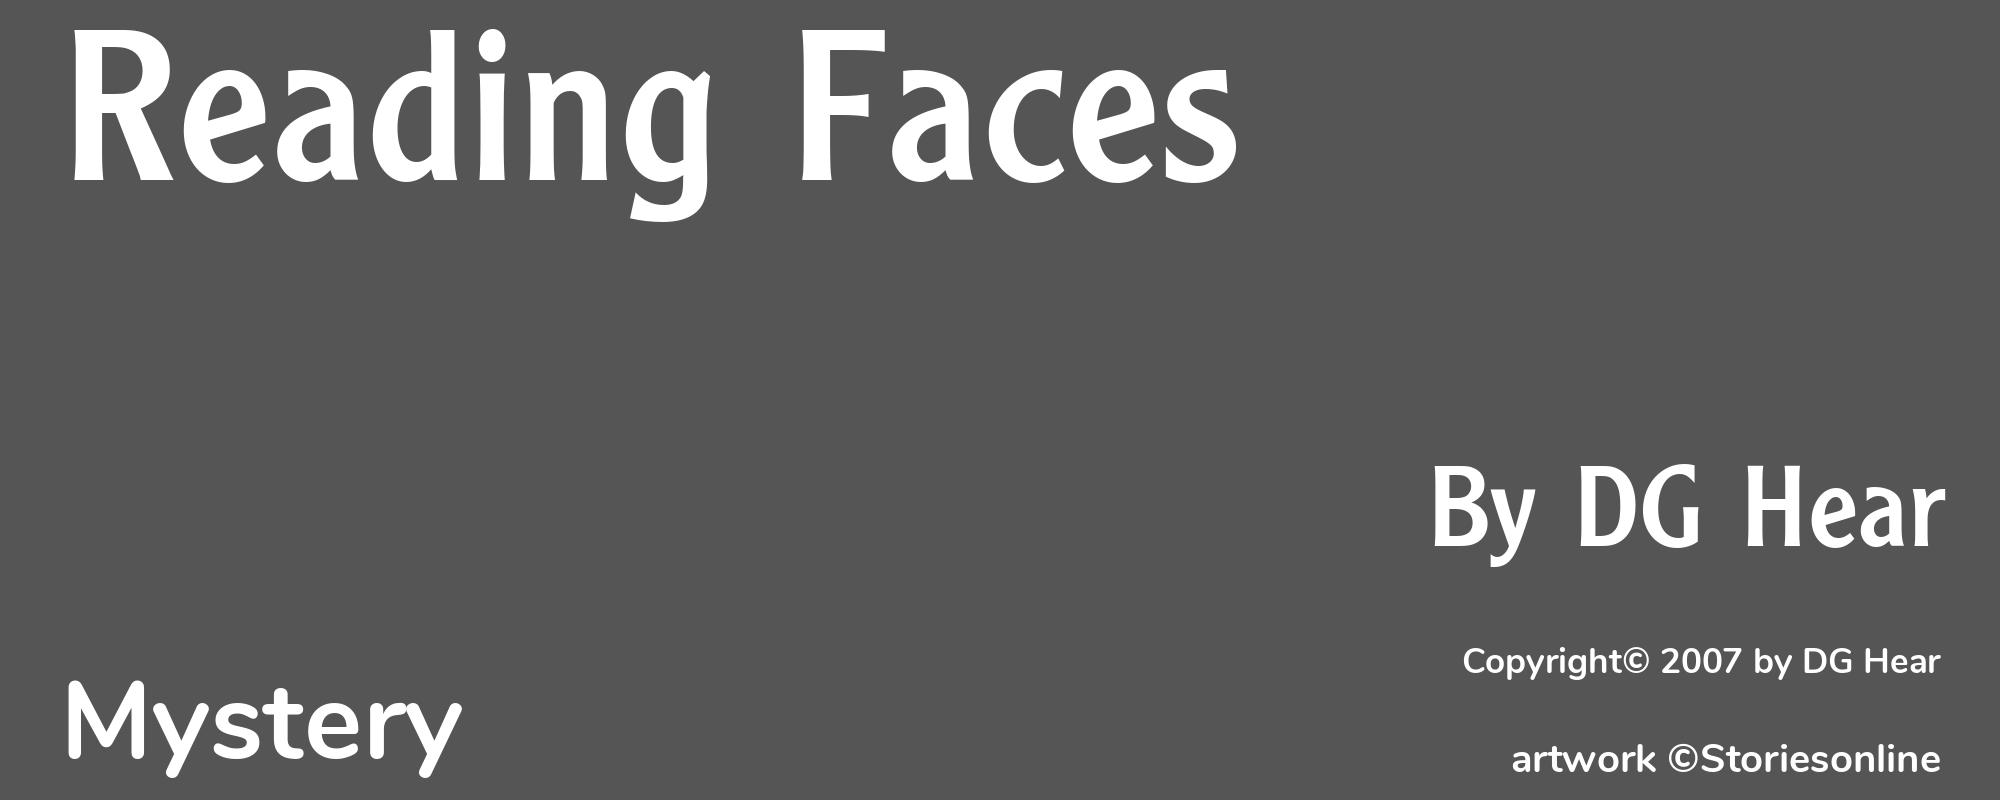 Reading Faces - Cover